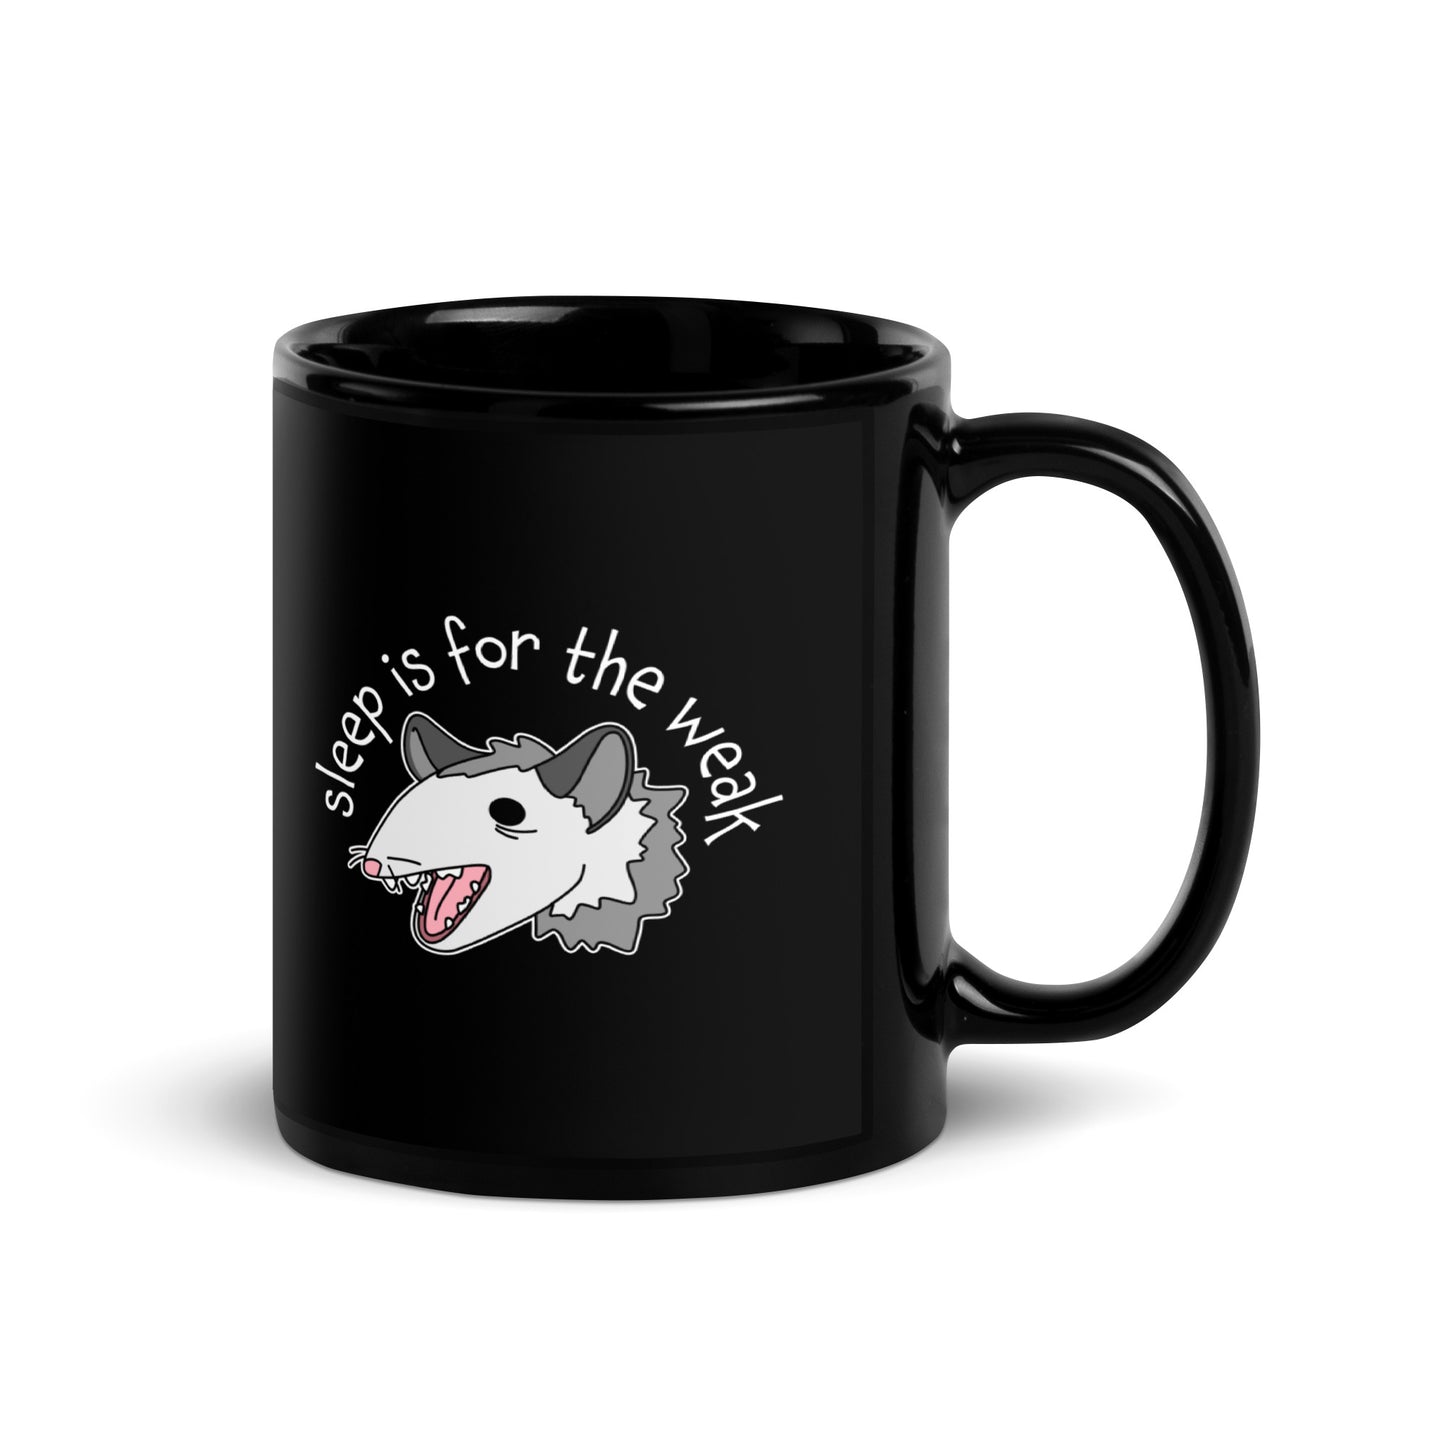 A black 11 ounce ceramic coffee mug featuring an illustration of an opossum with its mouth open, as if it was yelling. Text arching above the opossum reads "sleep is for the weak"